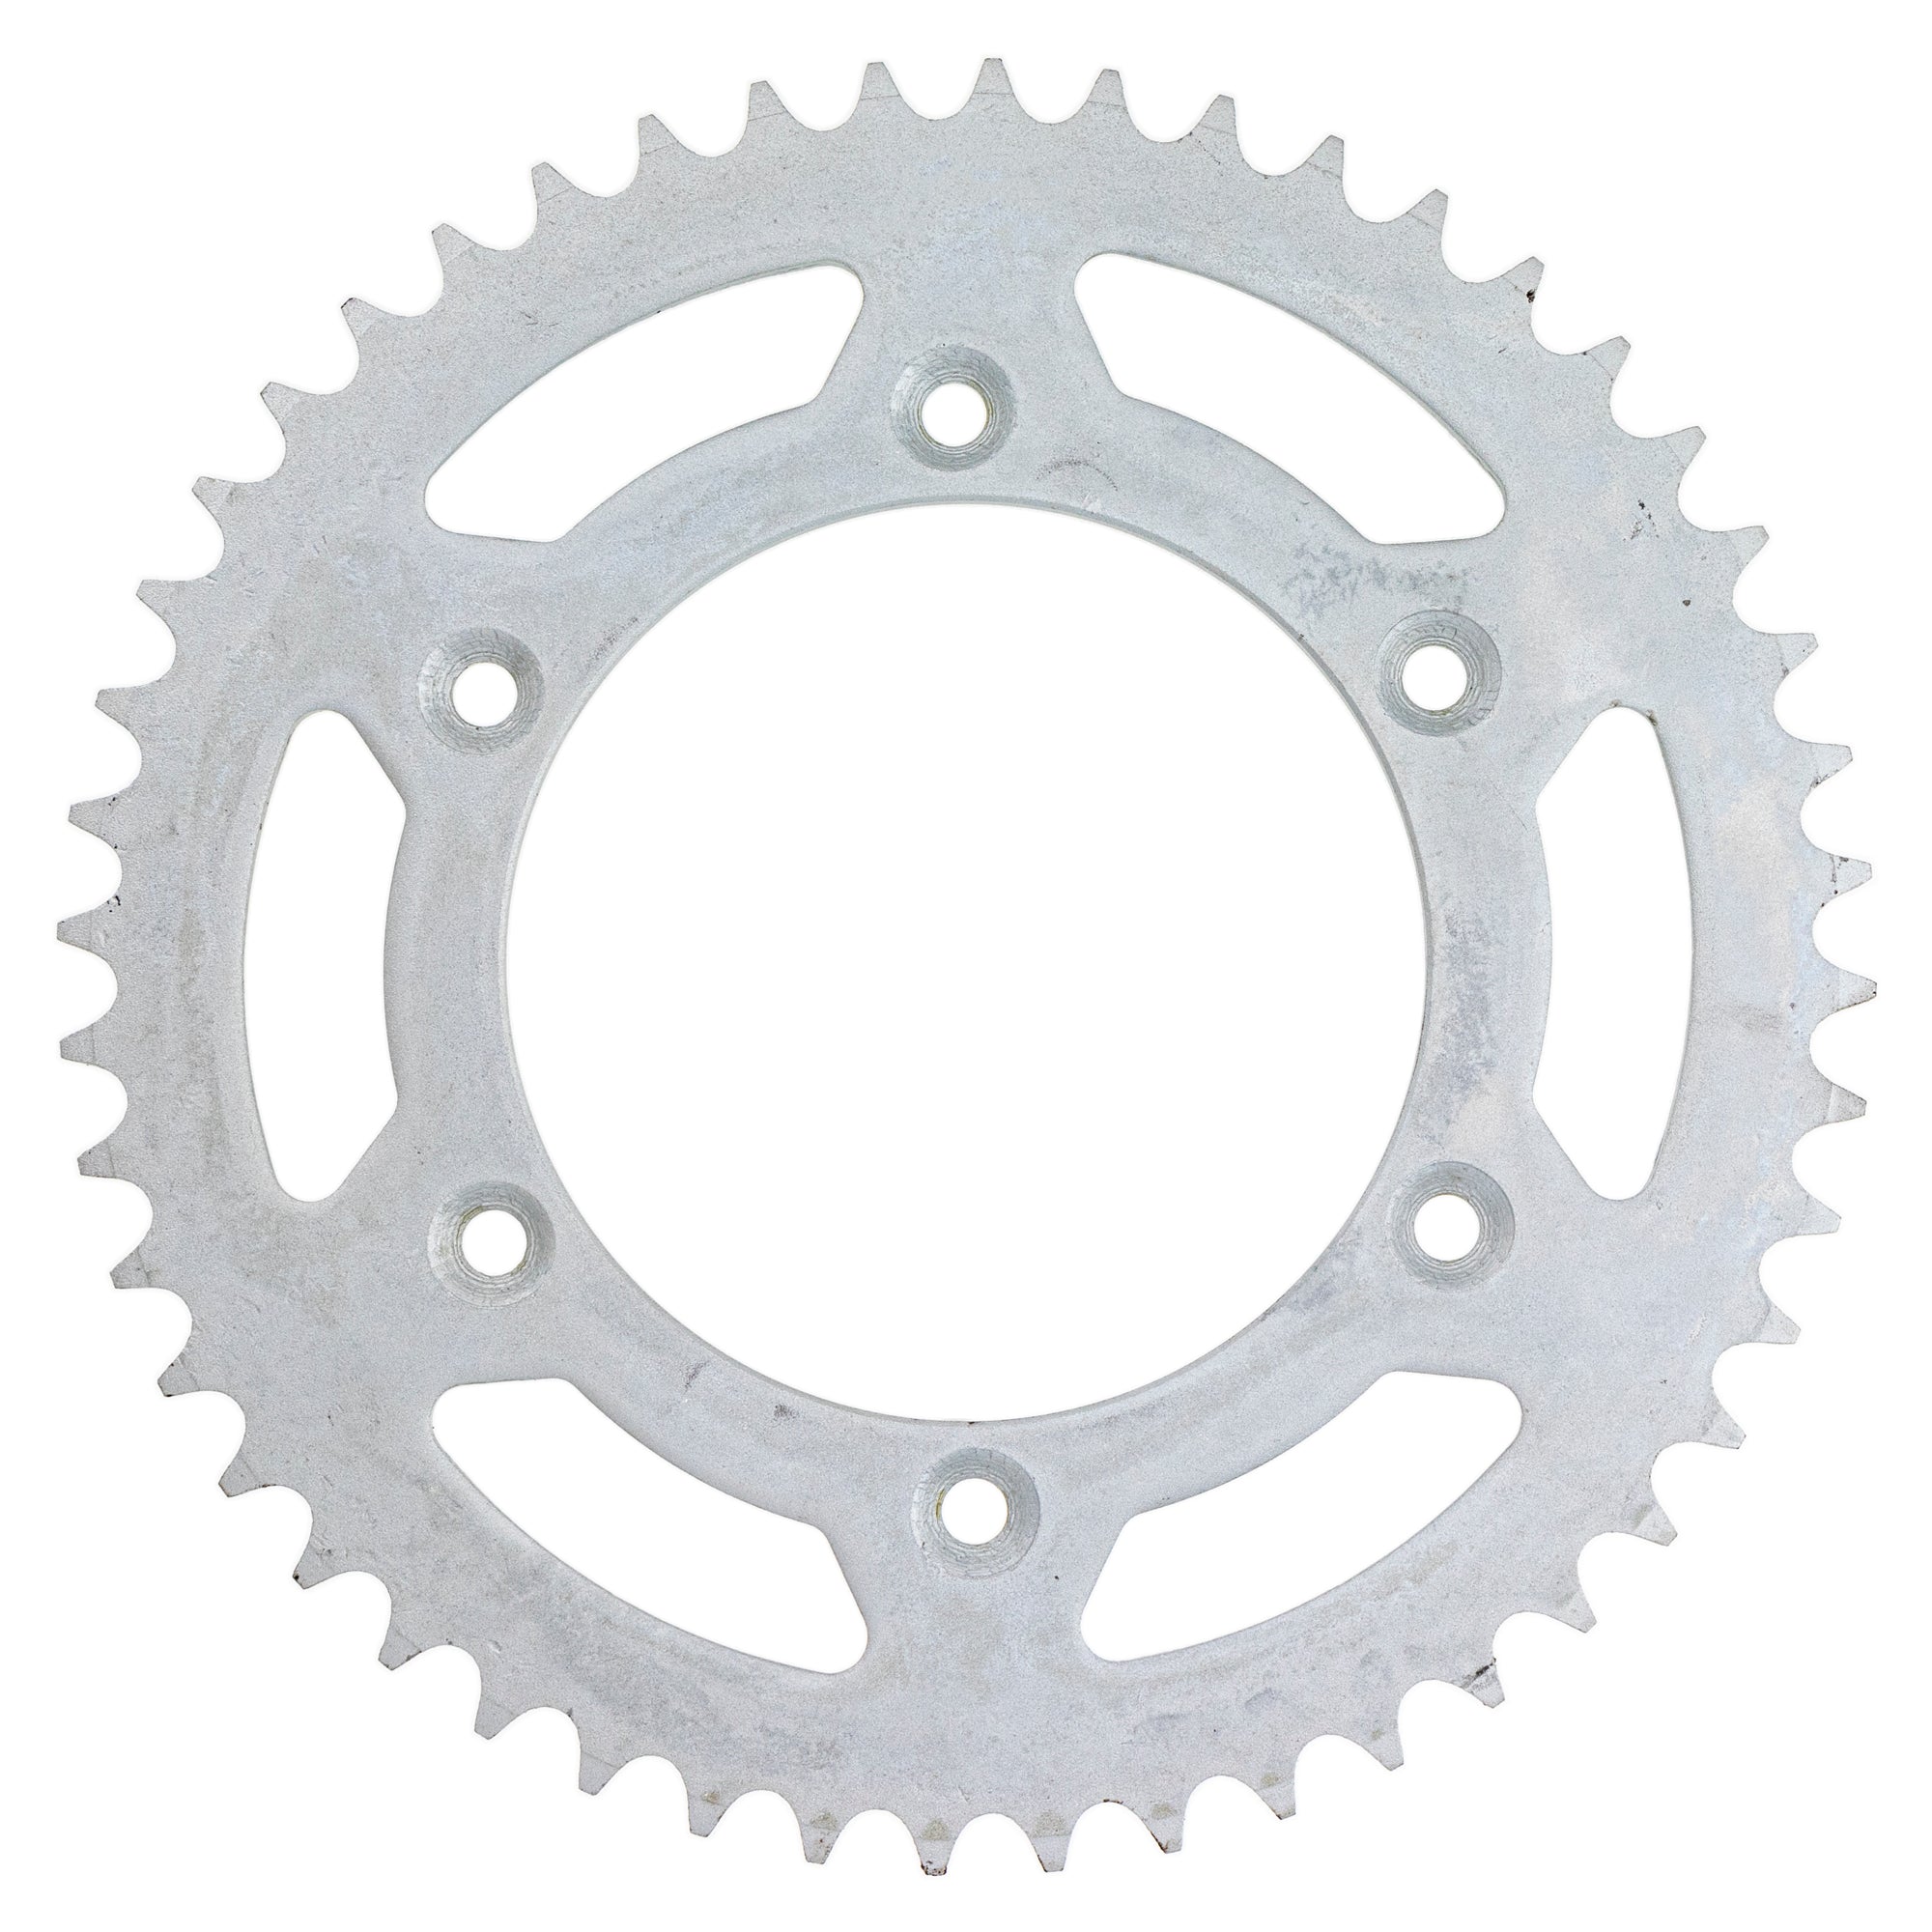 520 Pitch Front 14T Rear 48T Drive Sprocket Kit for KTM 250 200 525